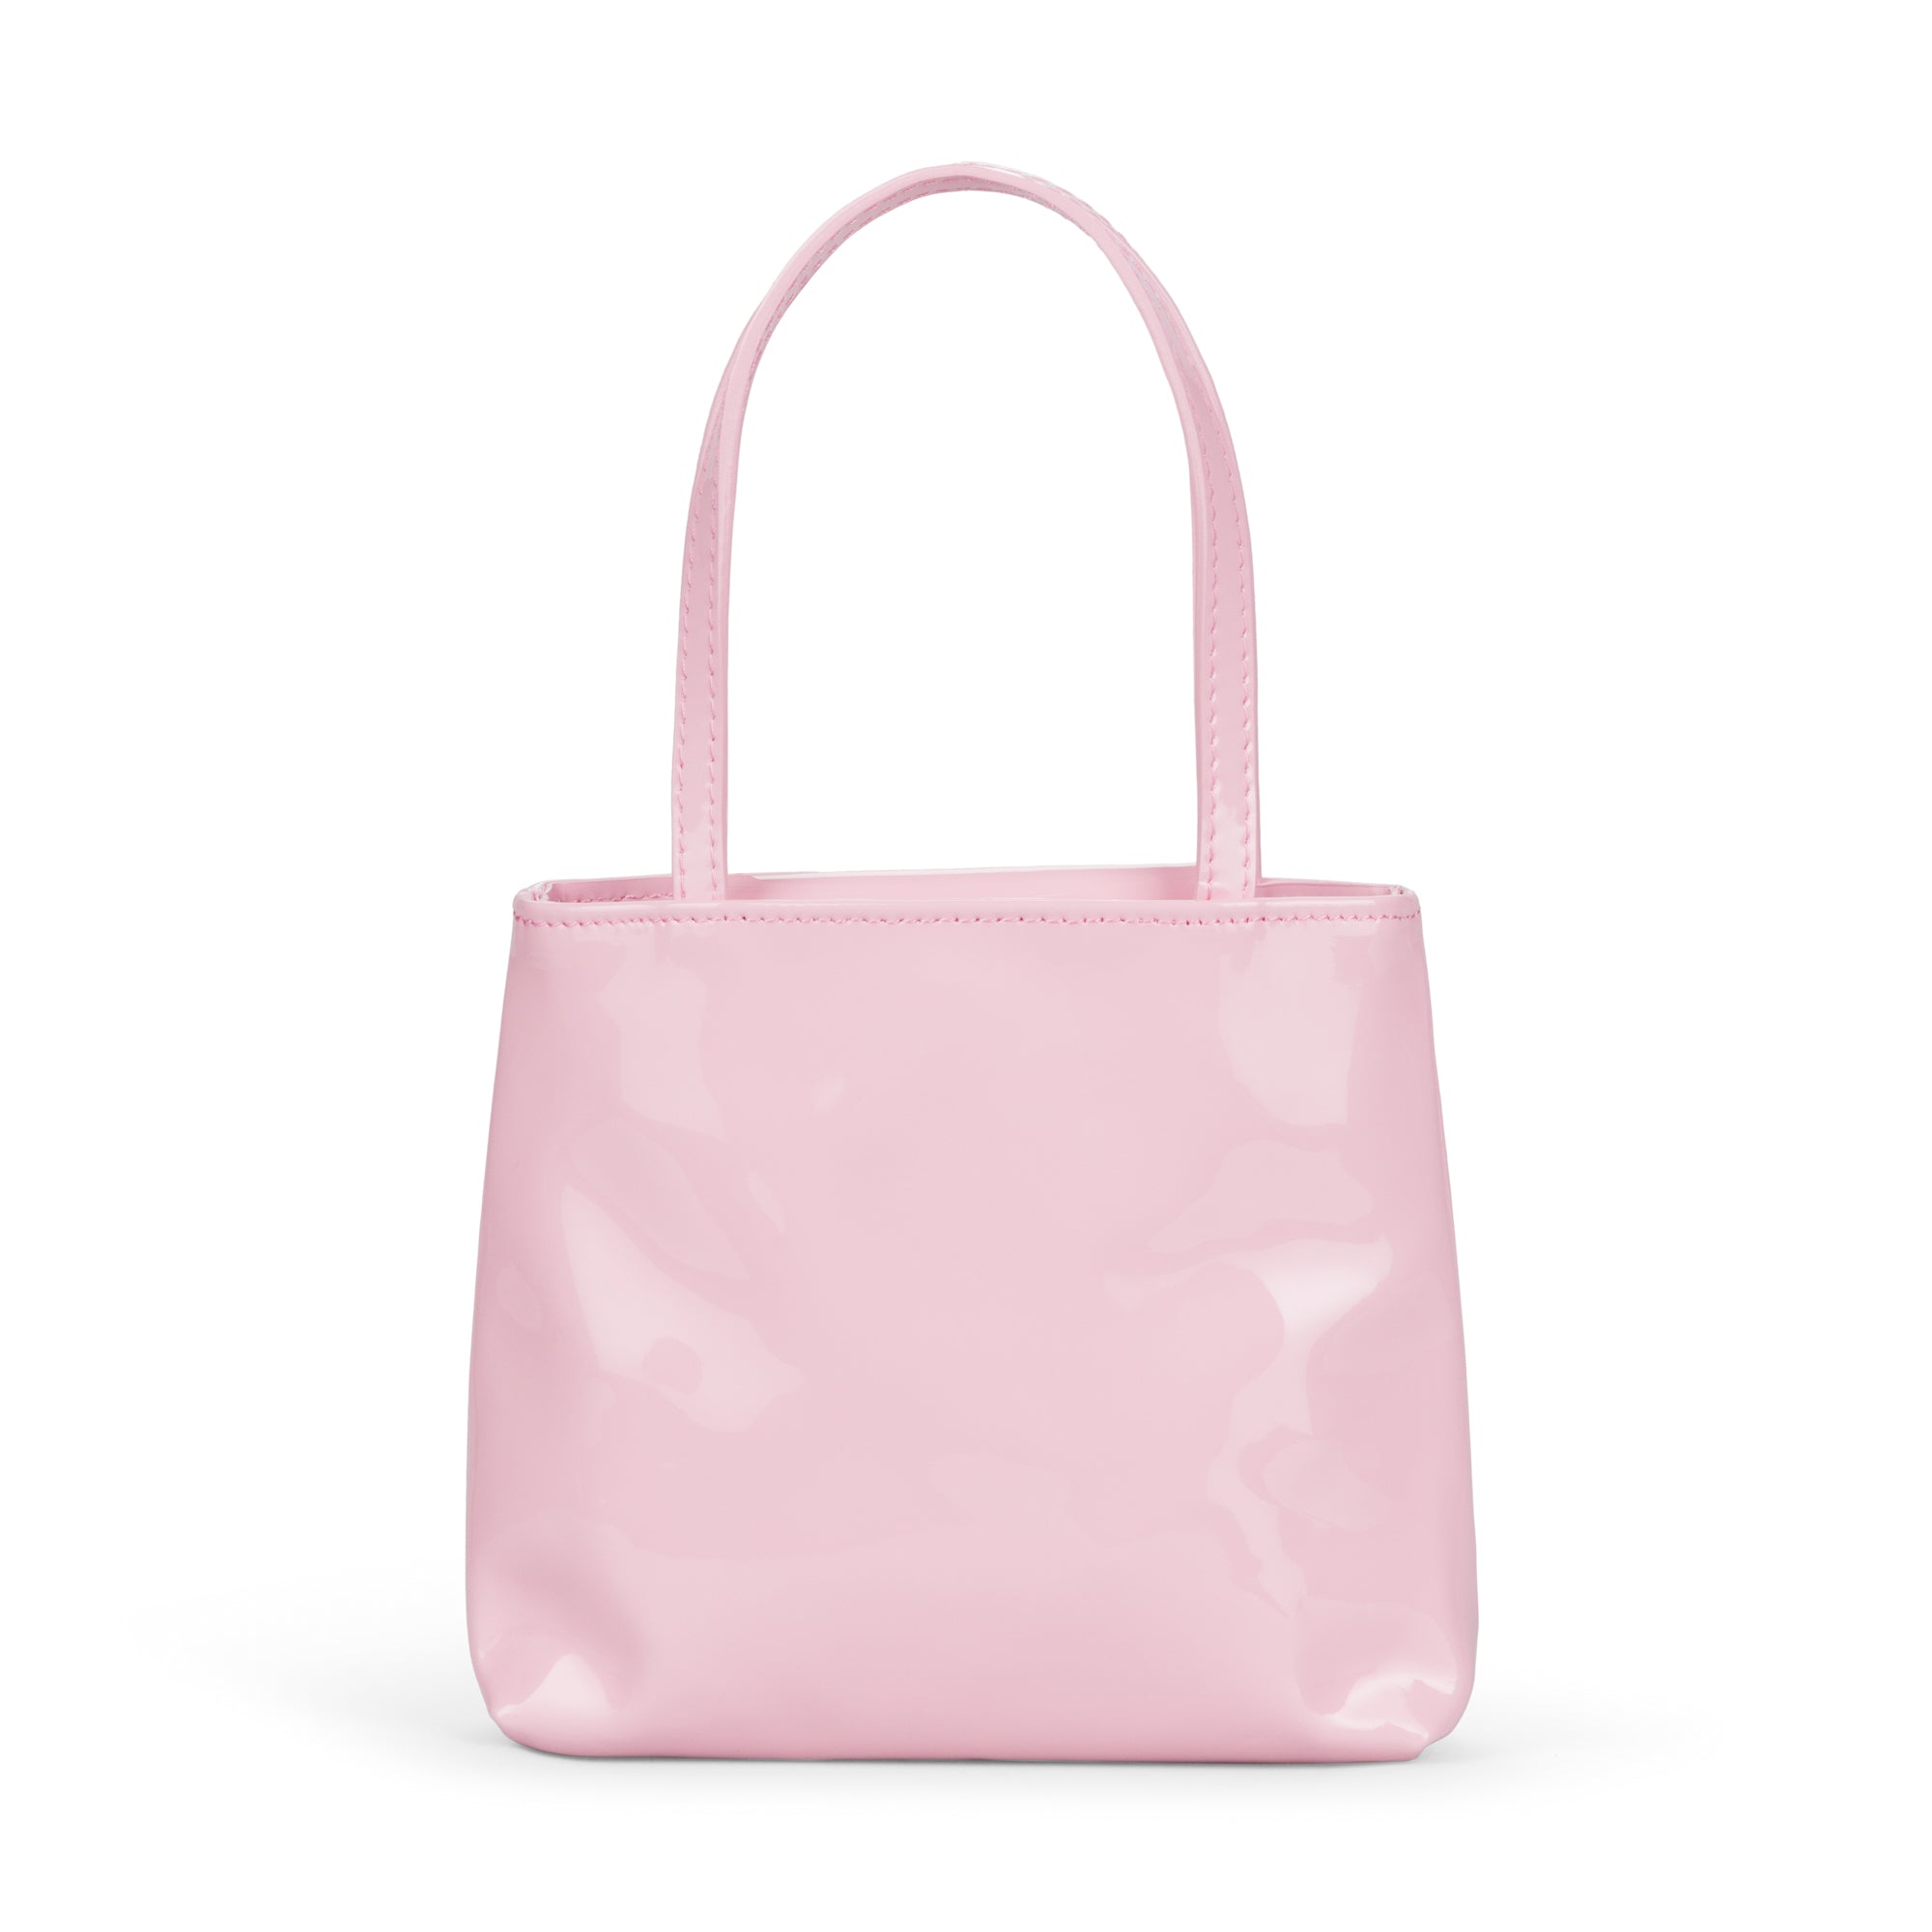 Little Leather Bag in Pink